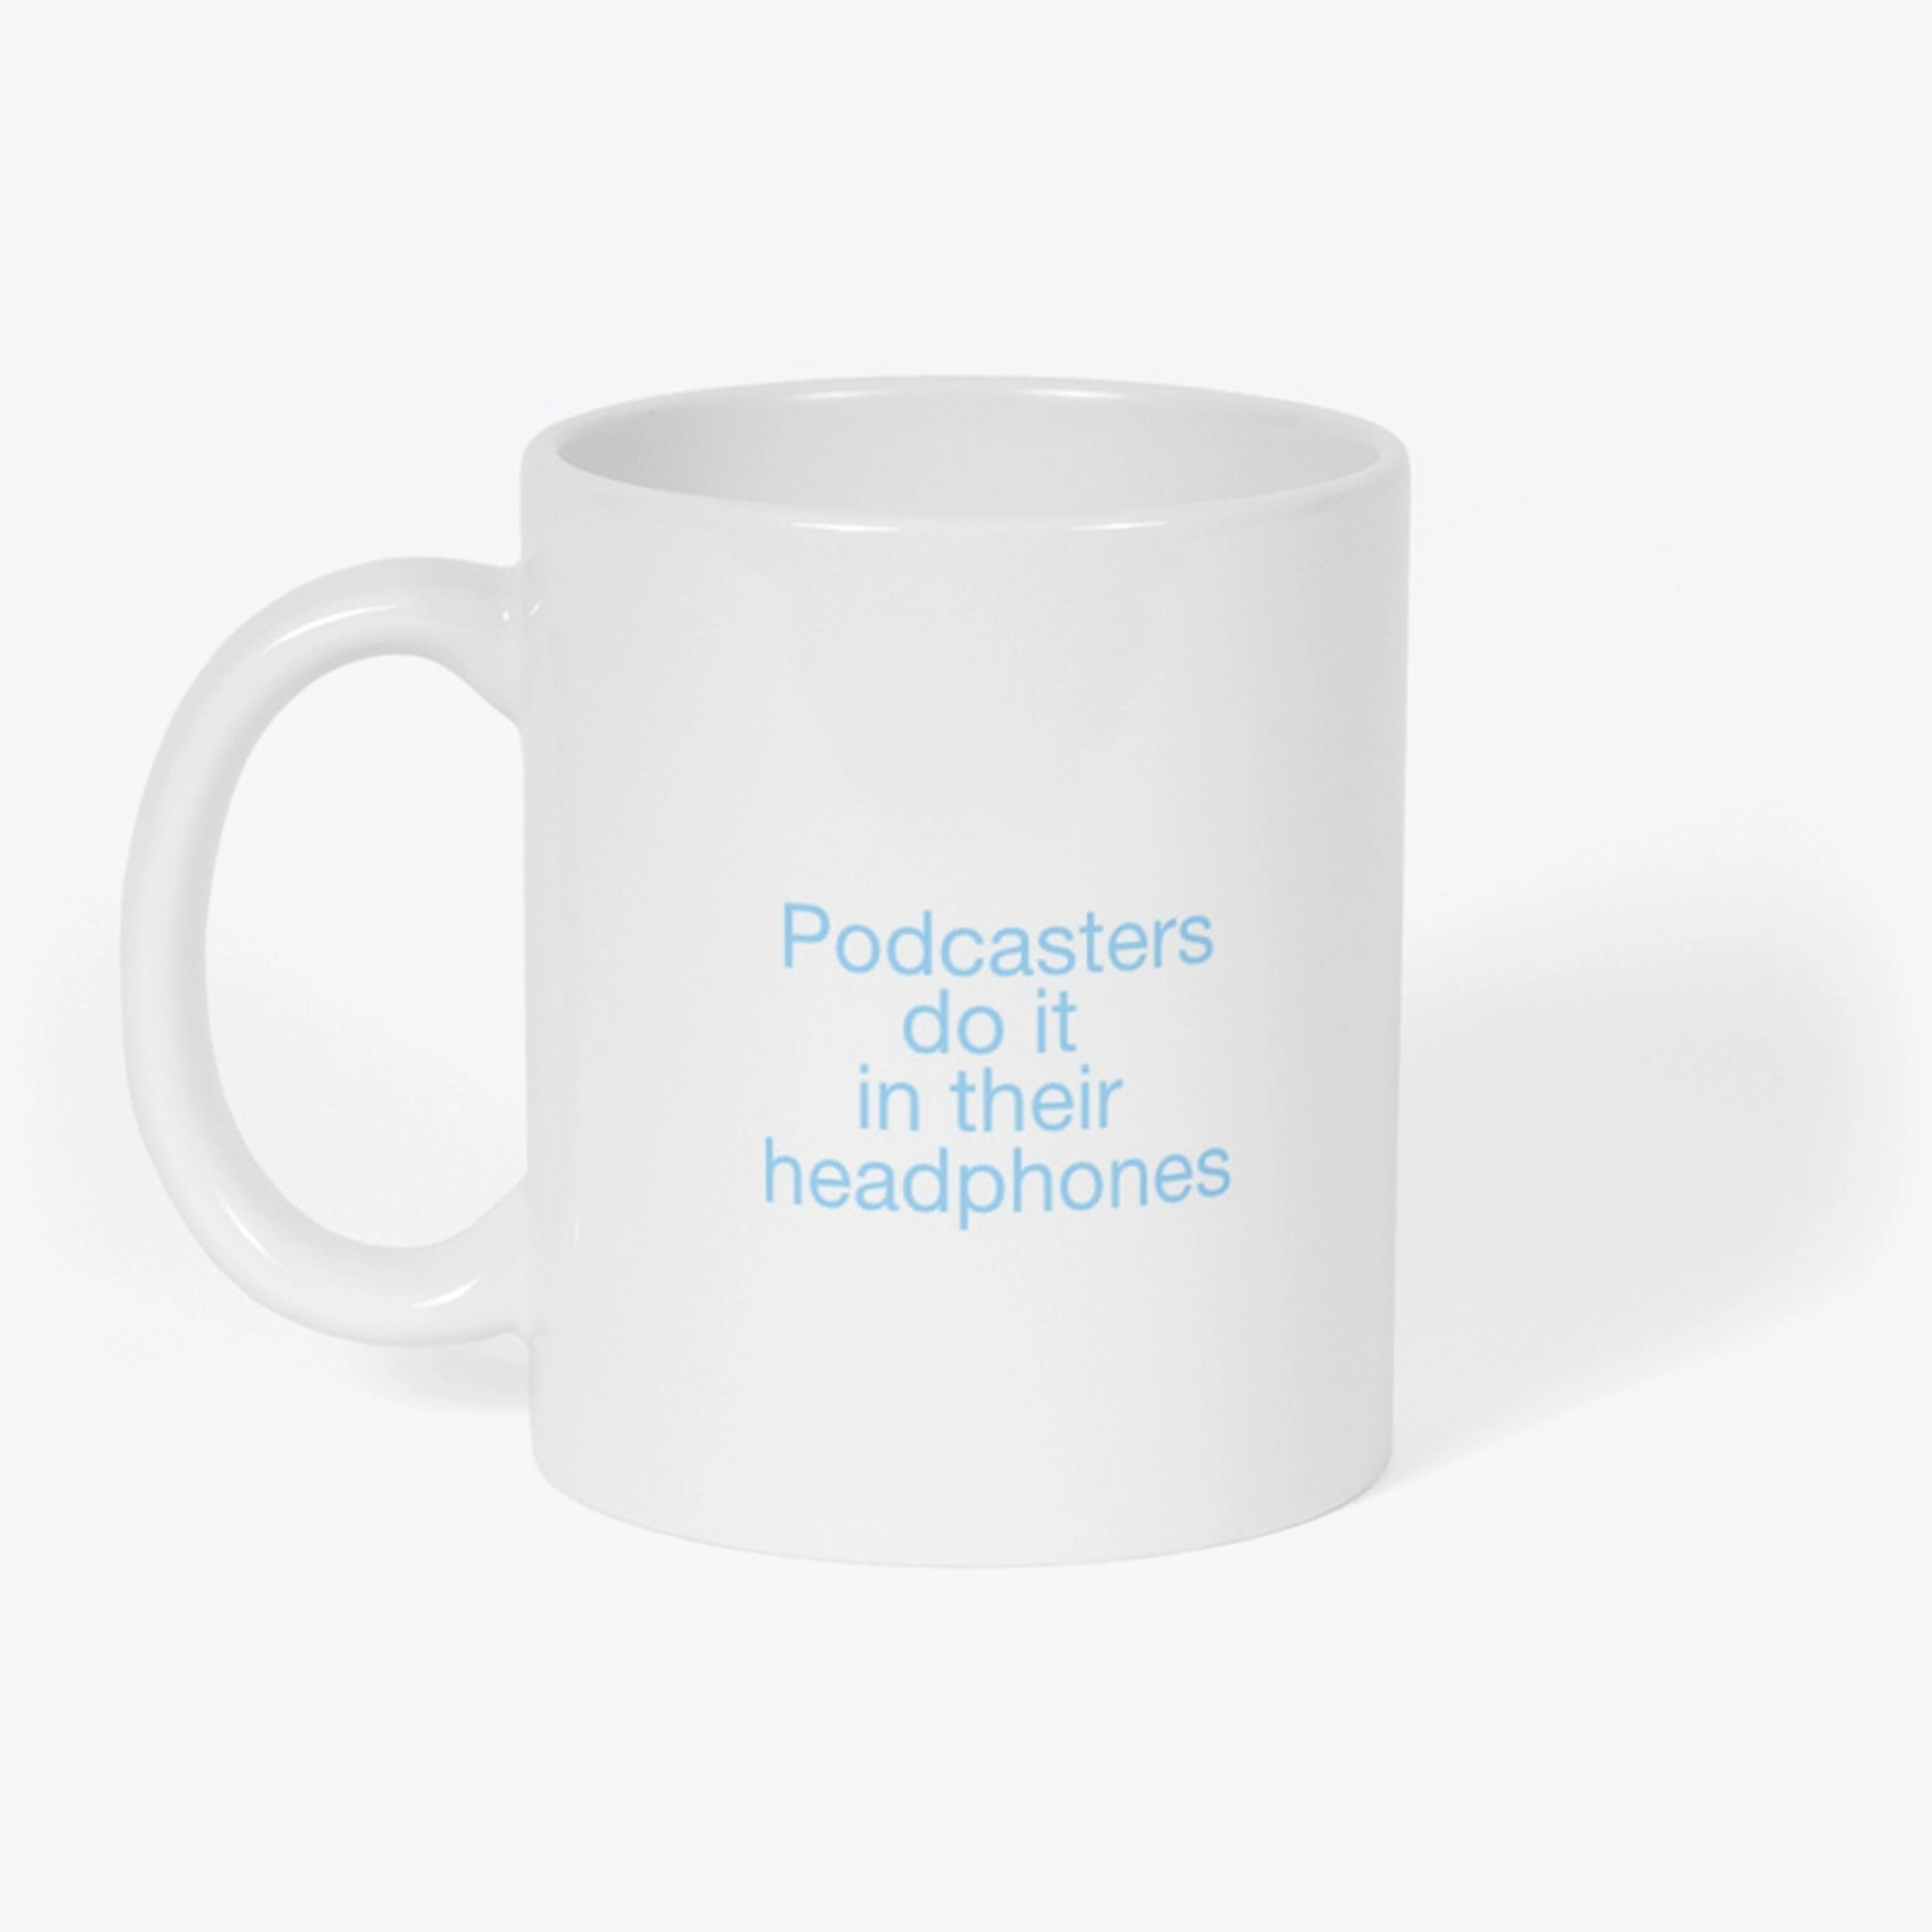 Podcasters do it in their headphones